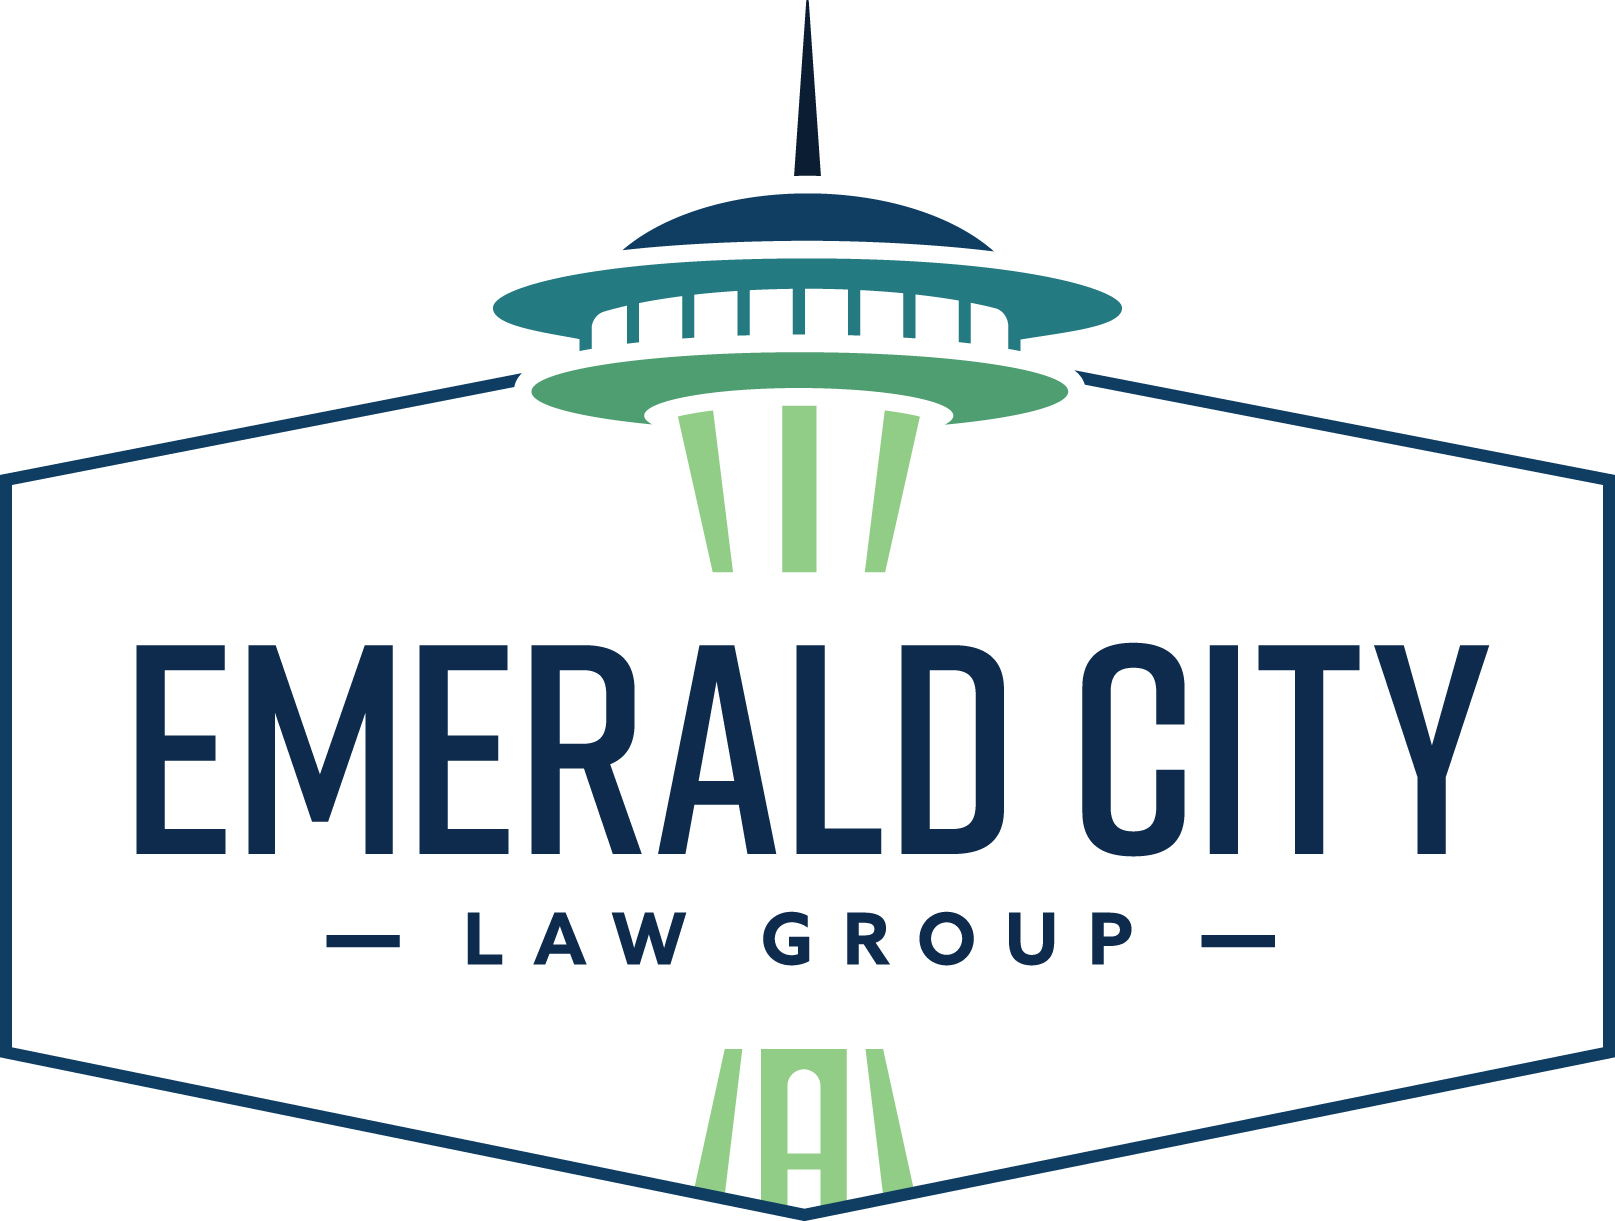 Print quality image of Emerald City Law Group logo